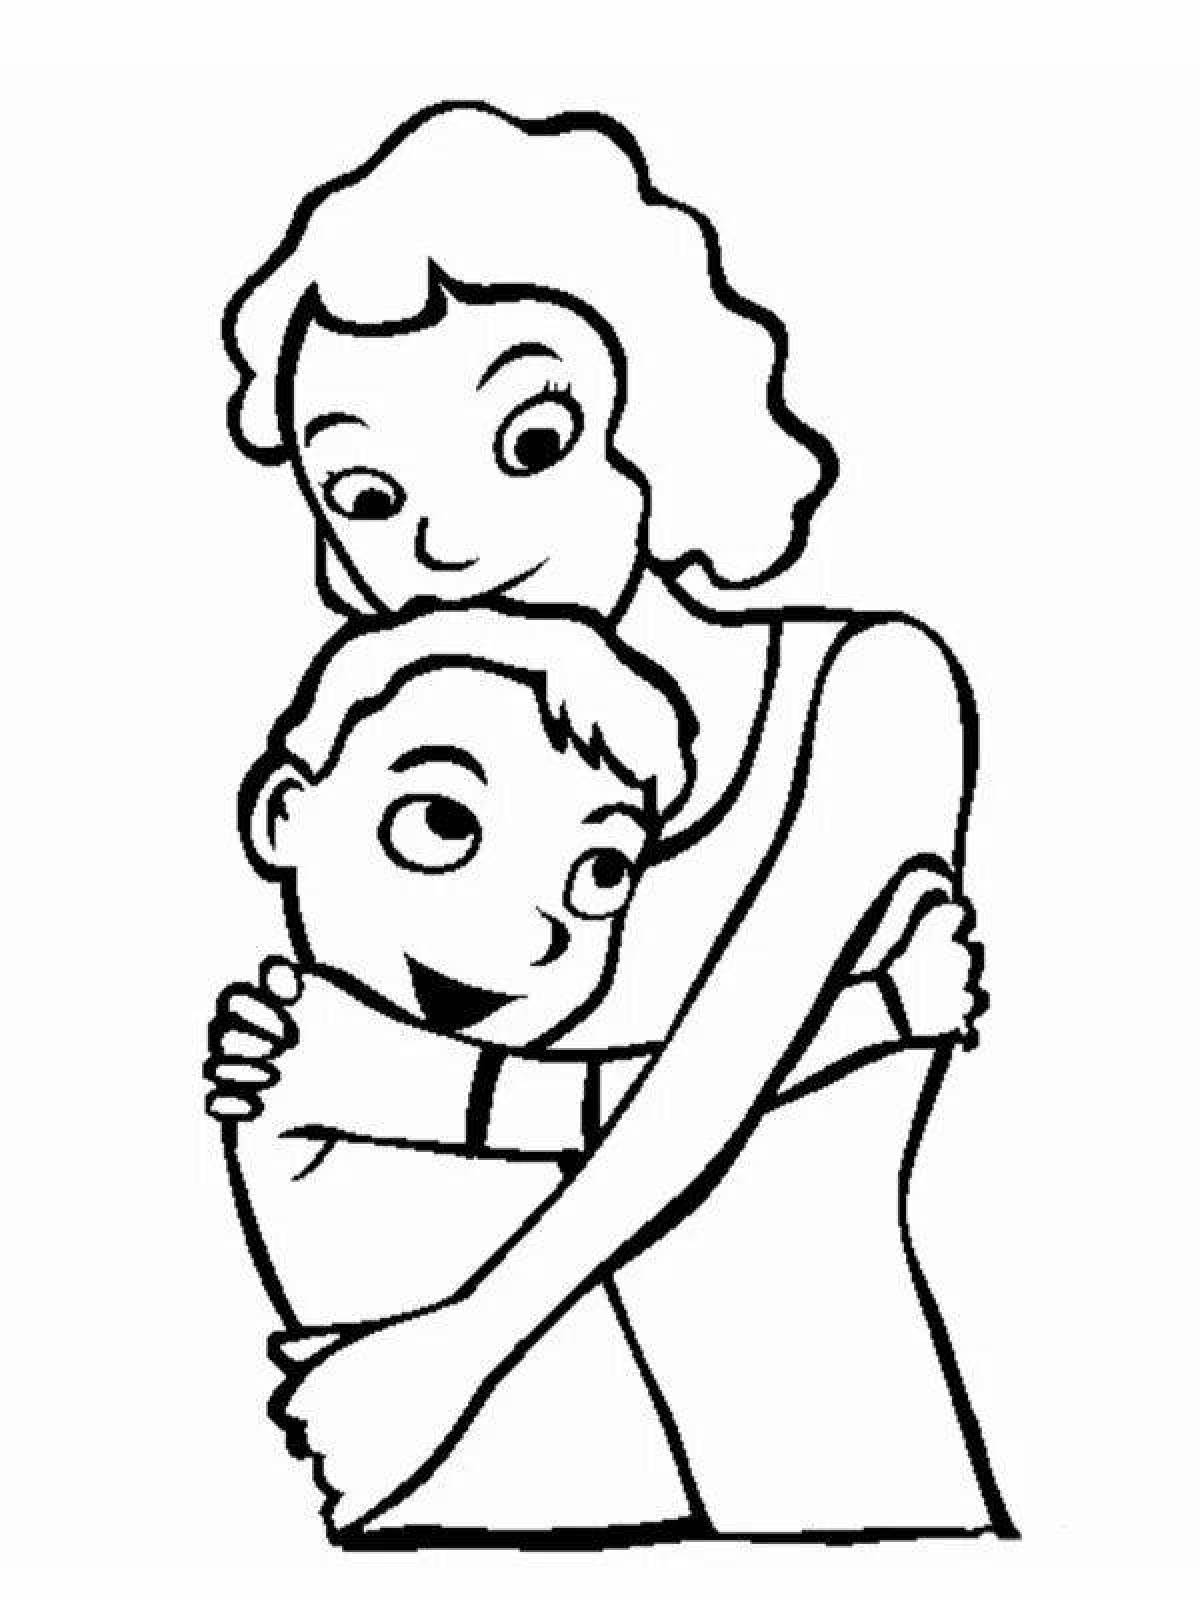 Exquisite mom and baby coloring book